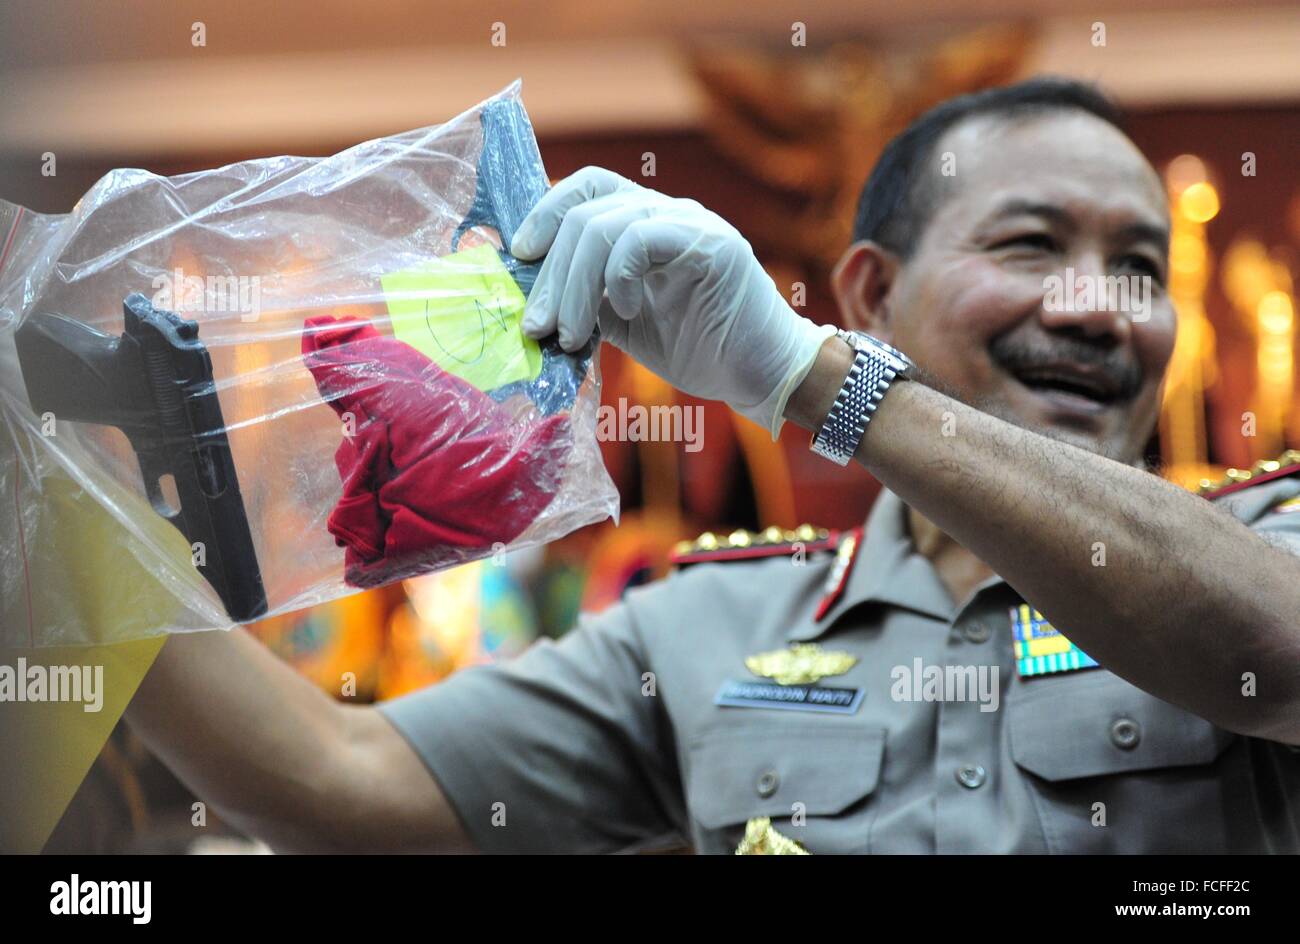 Jakarta, Indonesia. 22nd Jan, 2016. Indonesian National Police Chief General Badrodin Haiti shows a plastic bag containing guns used by militants in the Jan. 14 attack during a press conference at the national police headquarters in Jakarta, Indonesia, Jan. 22, 2016. Credit:  Zulkarnain/Xinhua/Alamy Live News Stock Photo